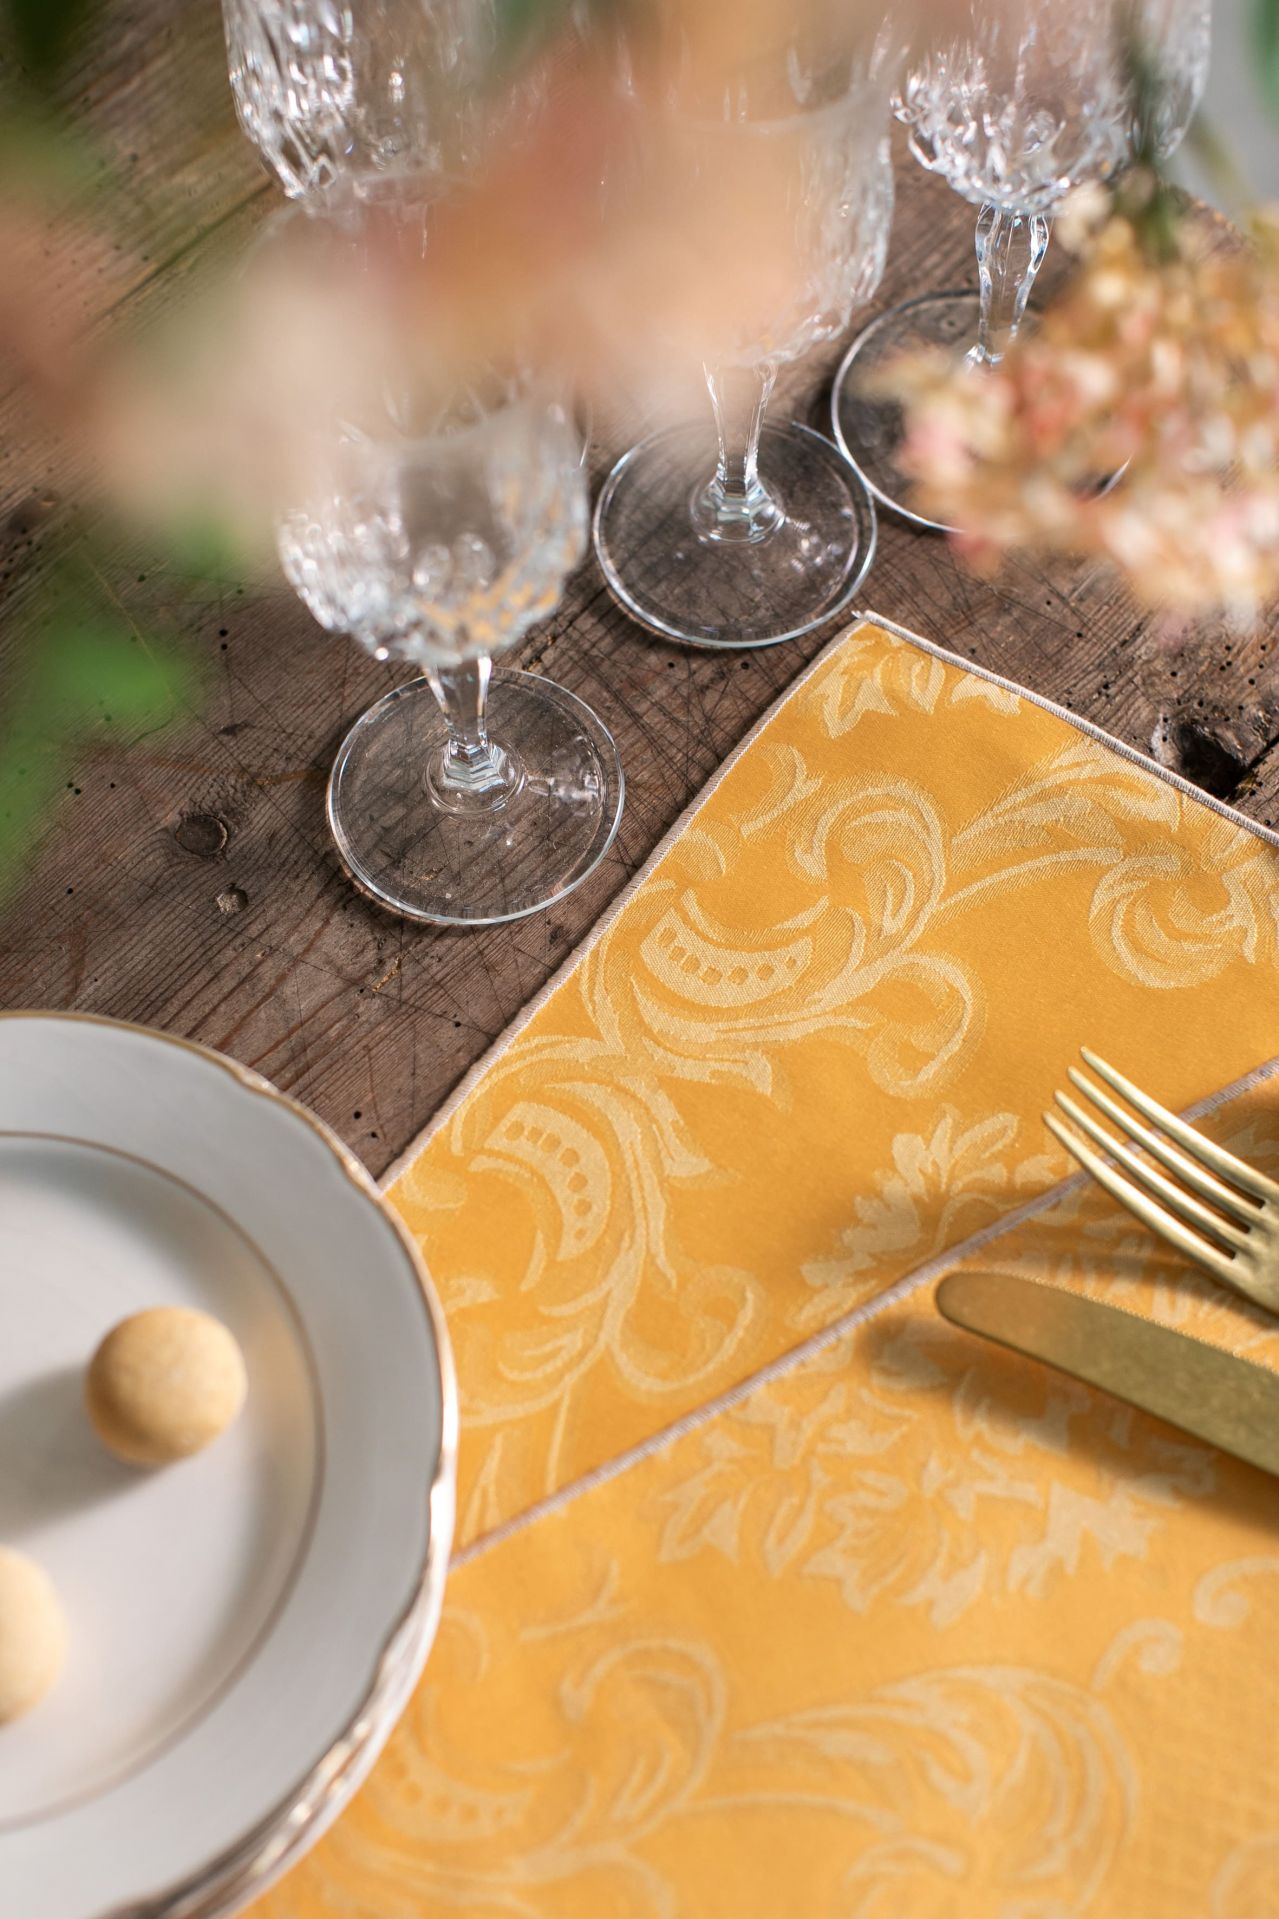 No Stain Brocade Placemat Filo